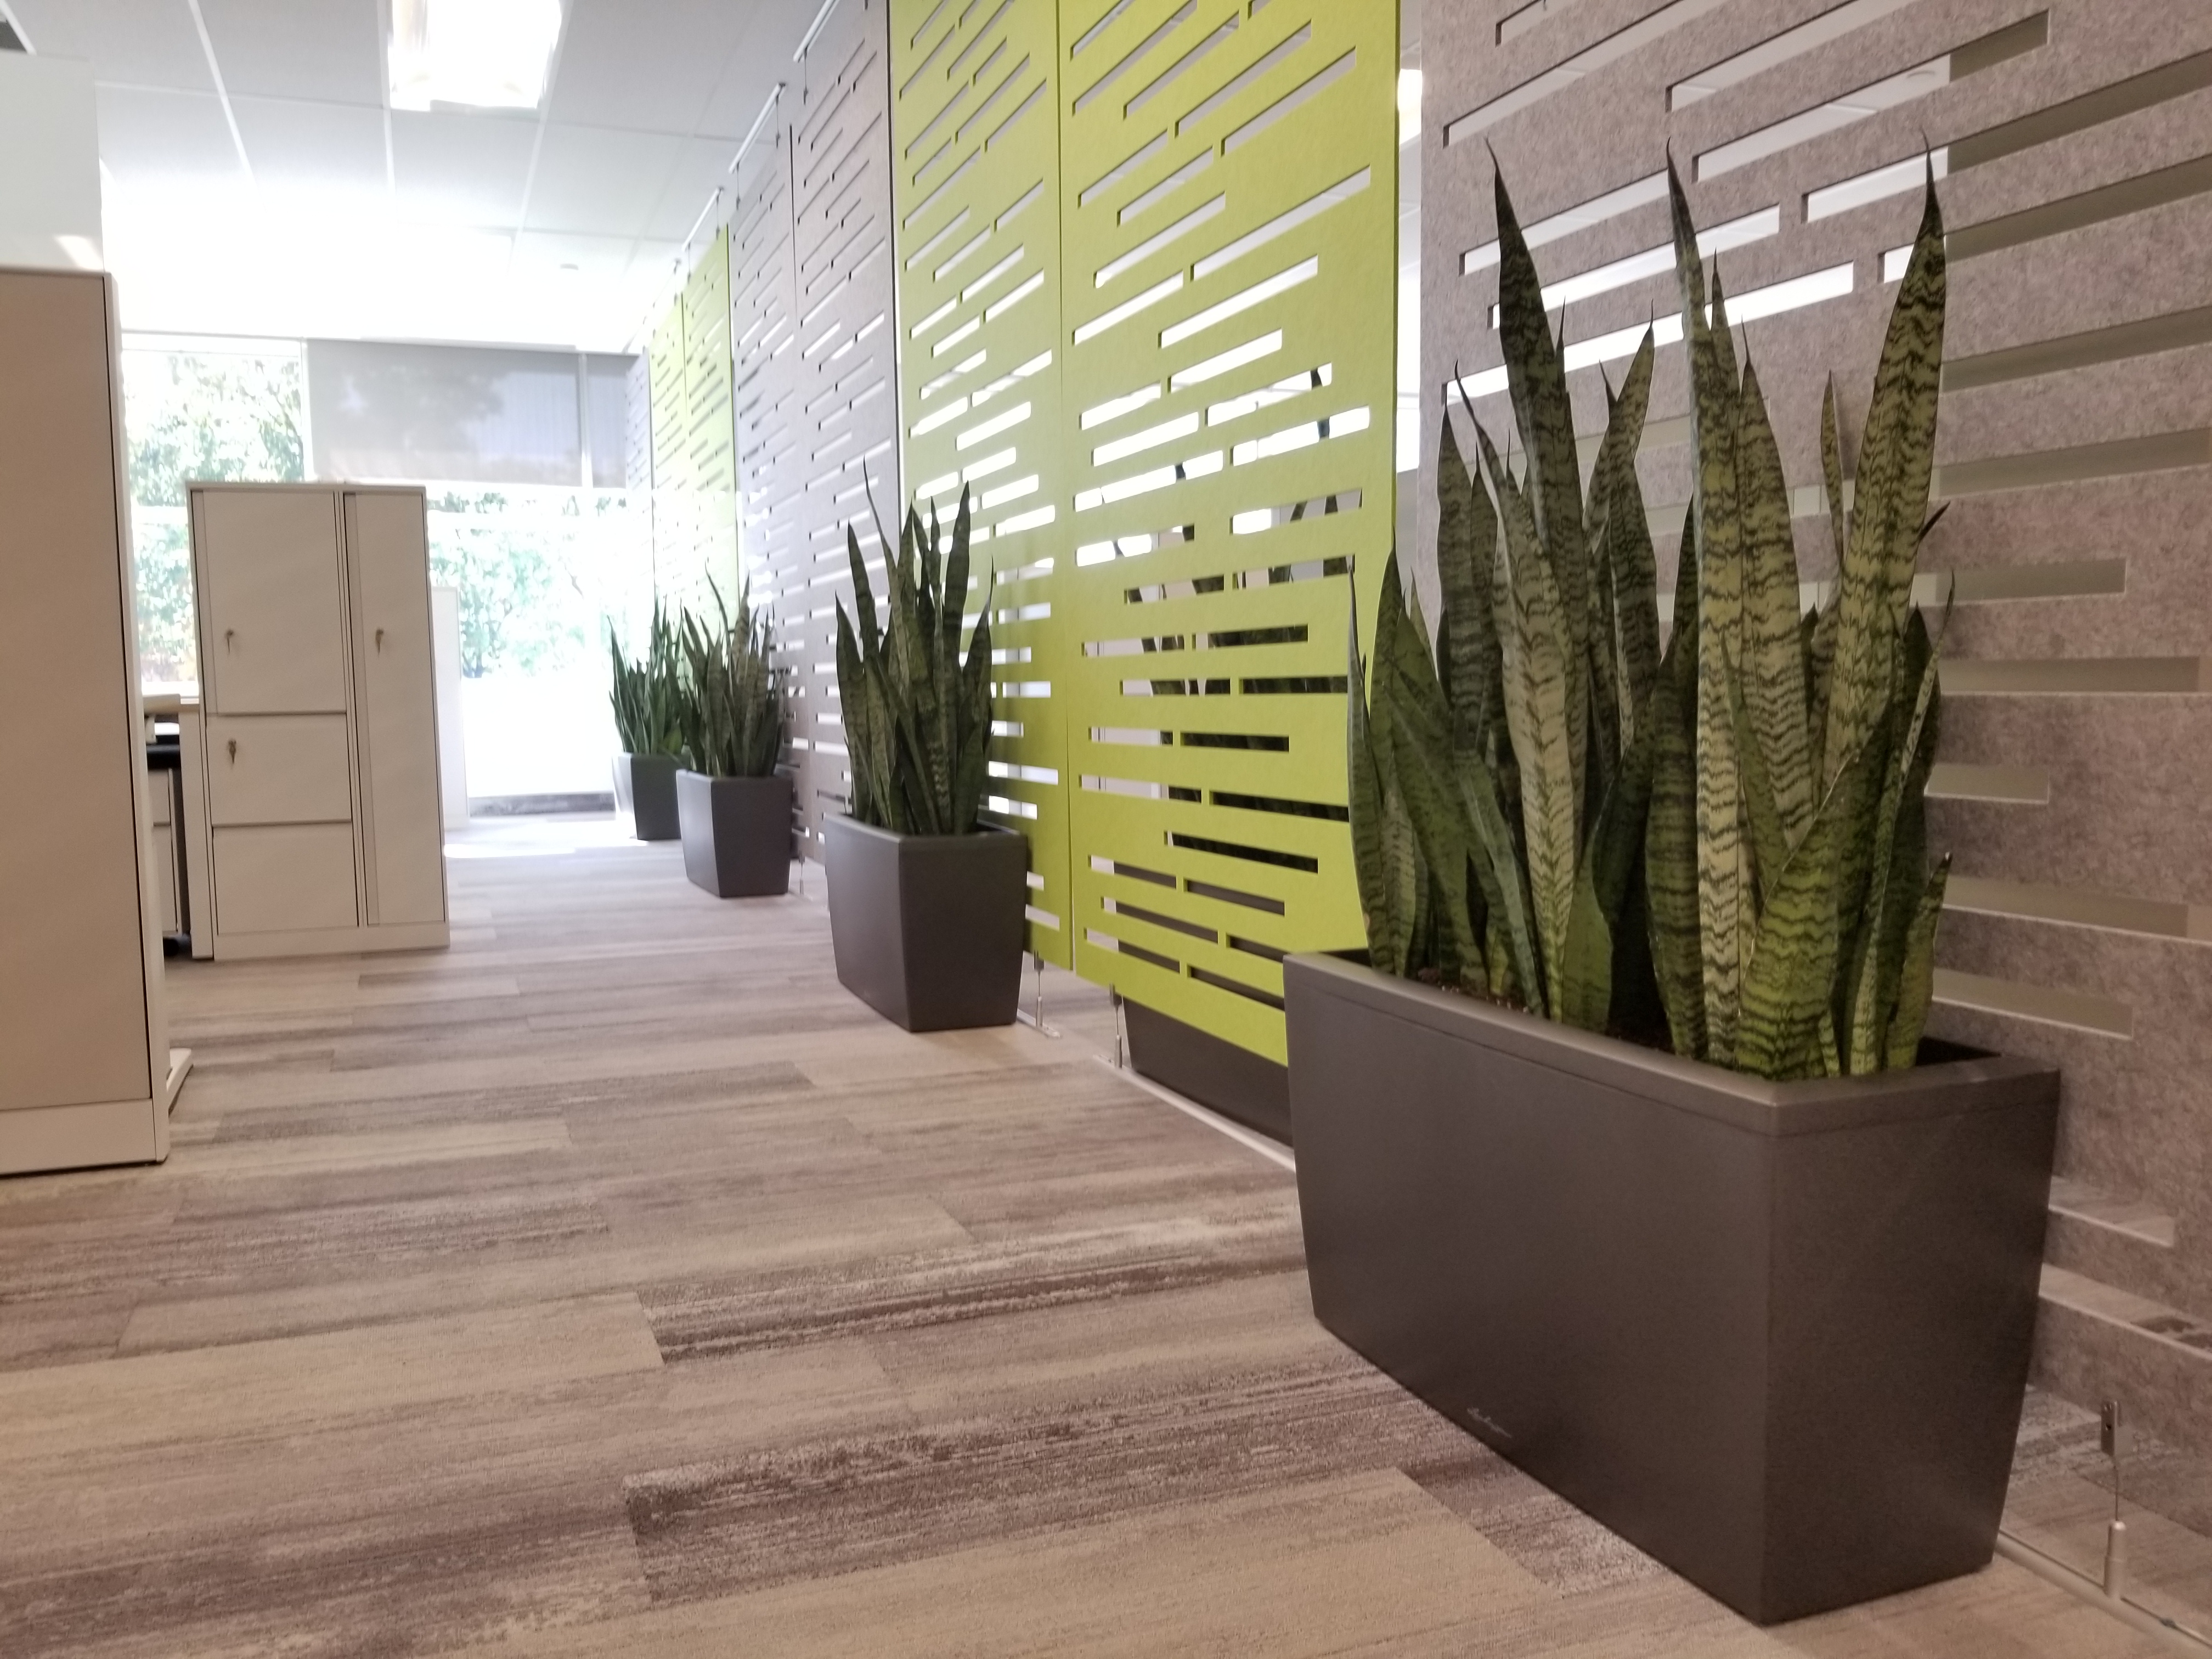 Welcoming employees back to the office,Snake plant, Sansevieria, Cararo, Lechuza